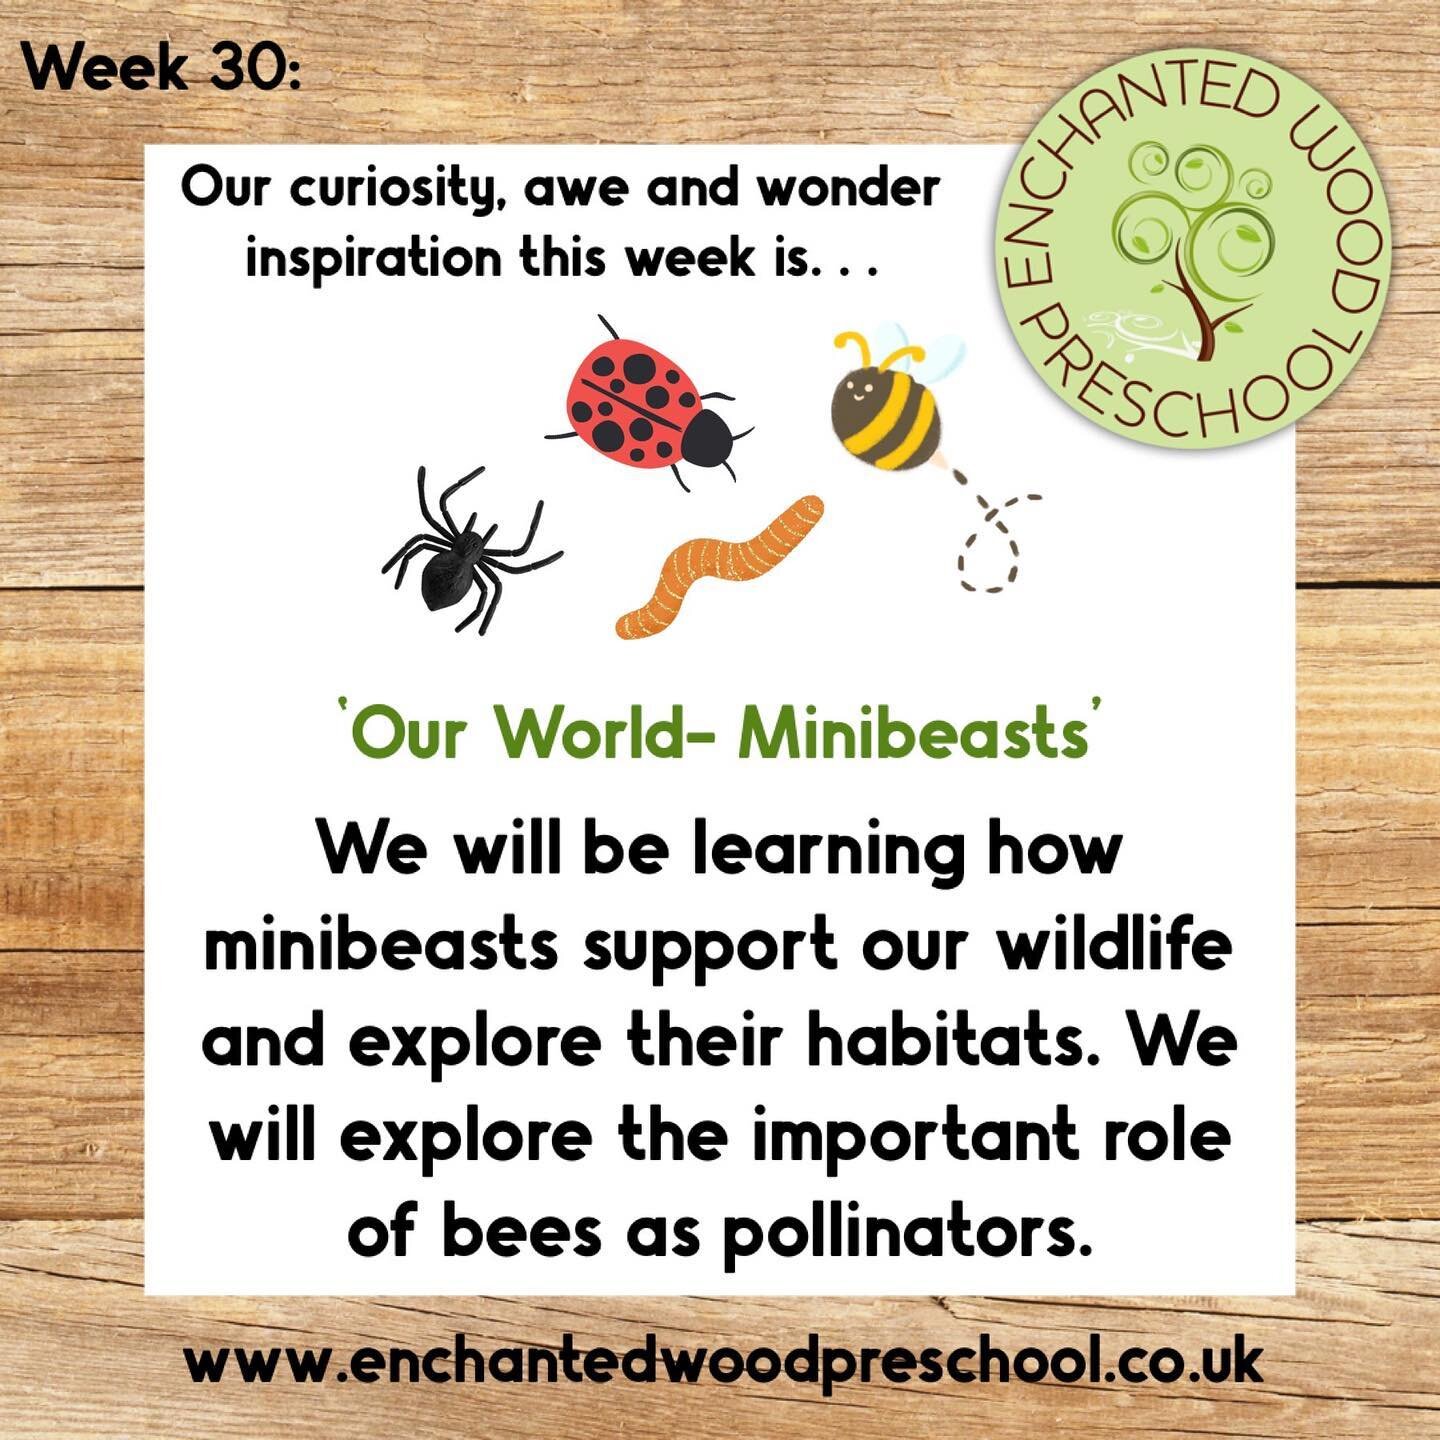 🌳 Week 30: Minibeasts

Our Summer term topic looks at &lsquo;Our World&rsquo; 🌎

&hellip; we look at our local area, our wider world and countries special to us. We also explore people who help us, animals on land, in the air and under the sea. 

?